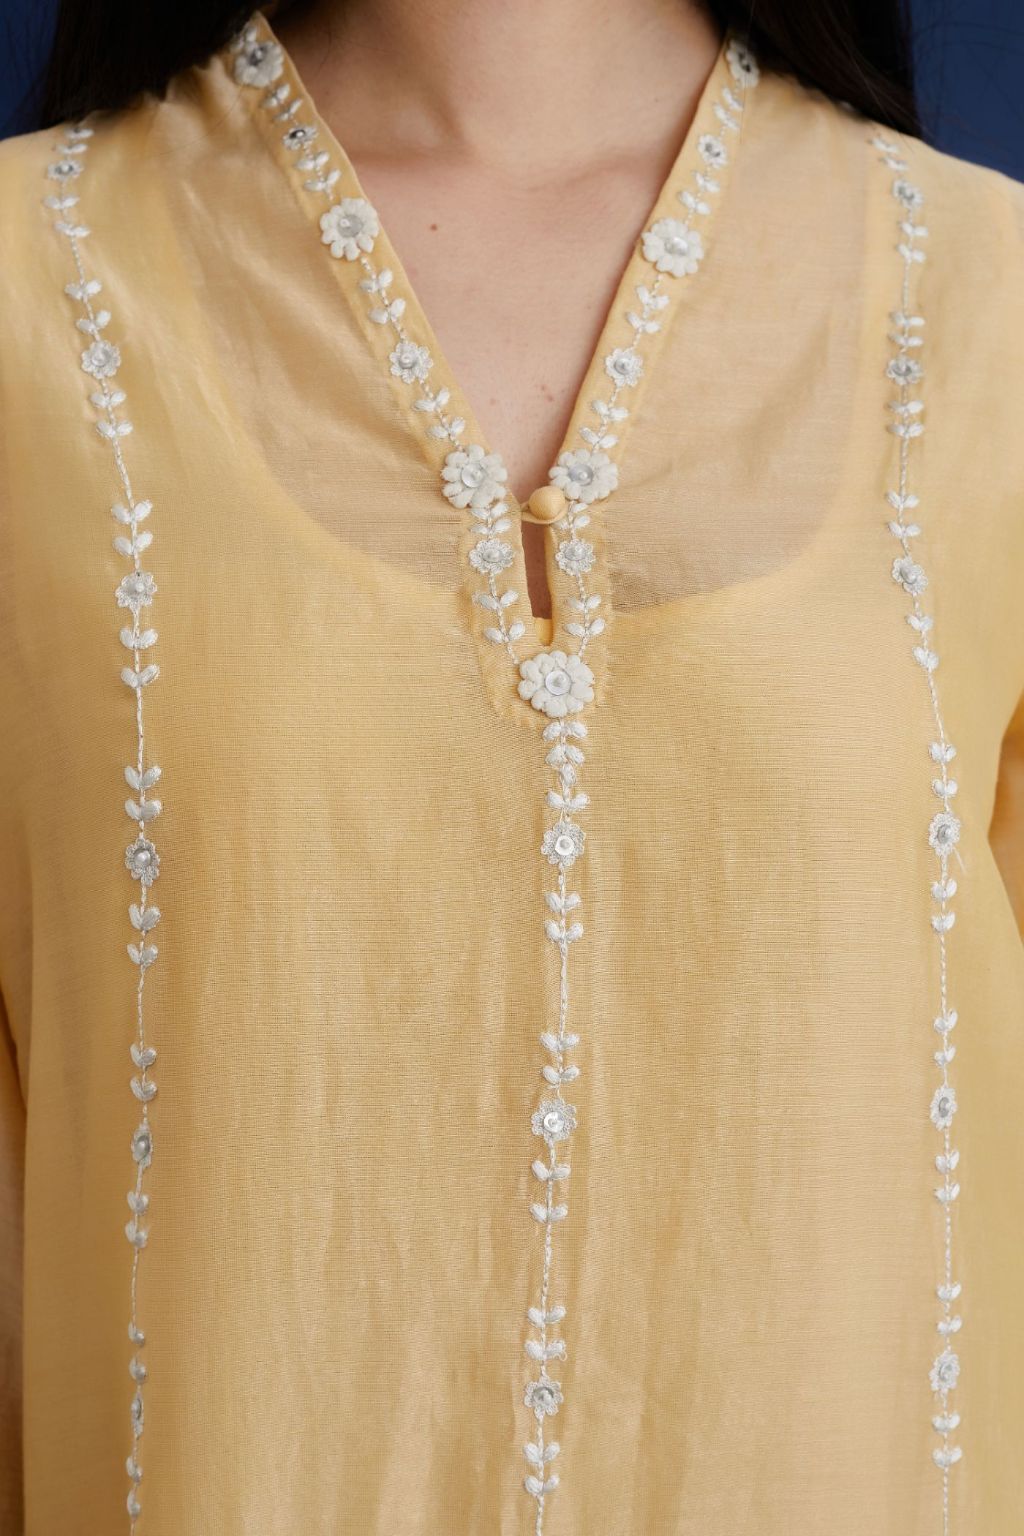 Yellow silk chanderi straight kurta set with all-ovre contrast thread embroidery, highlighted with sequins hand work